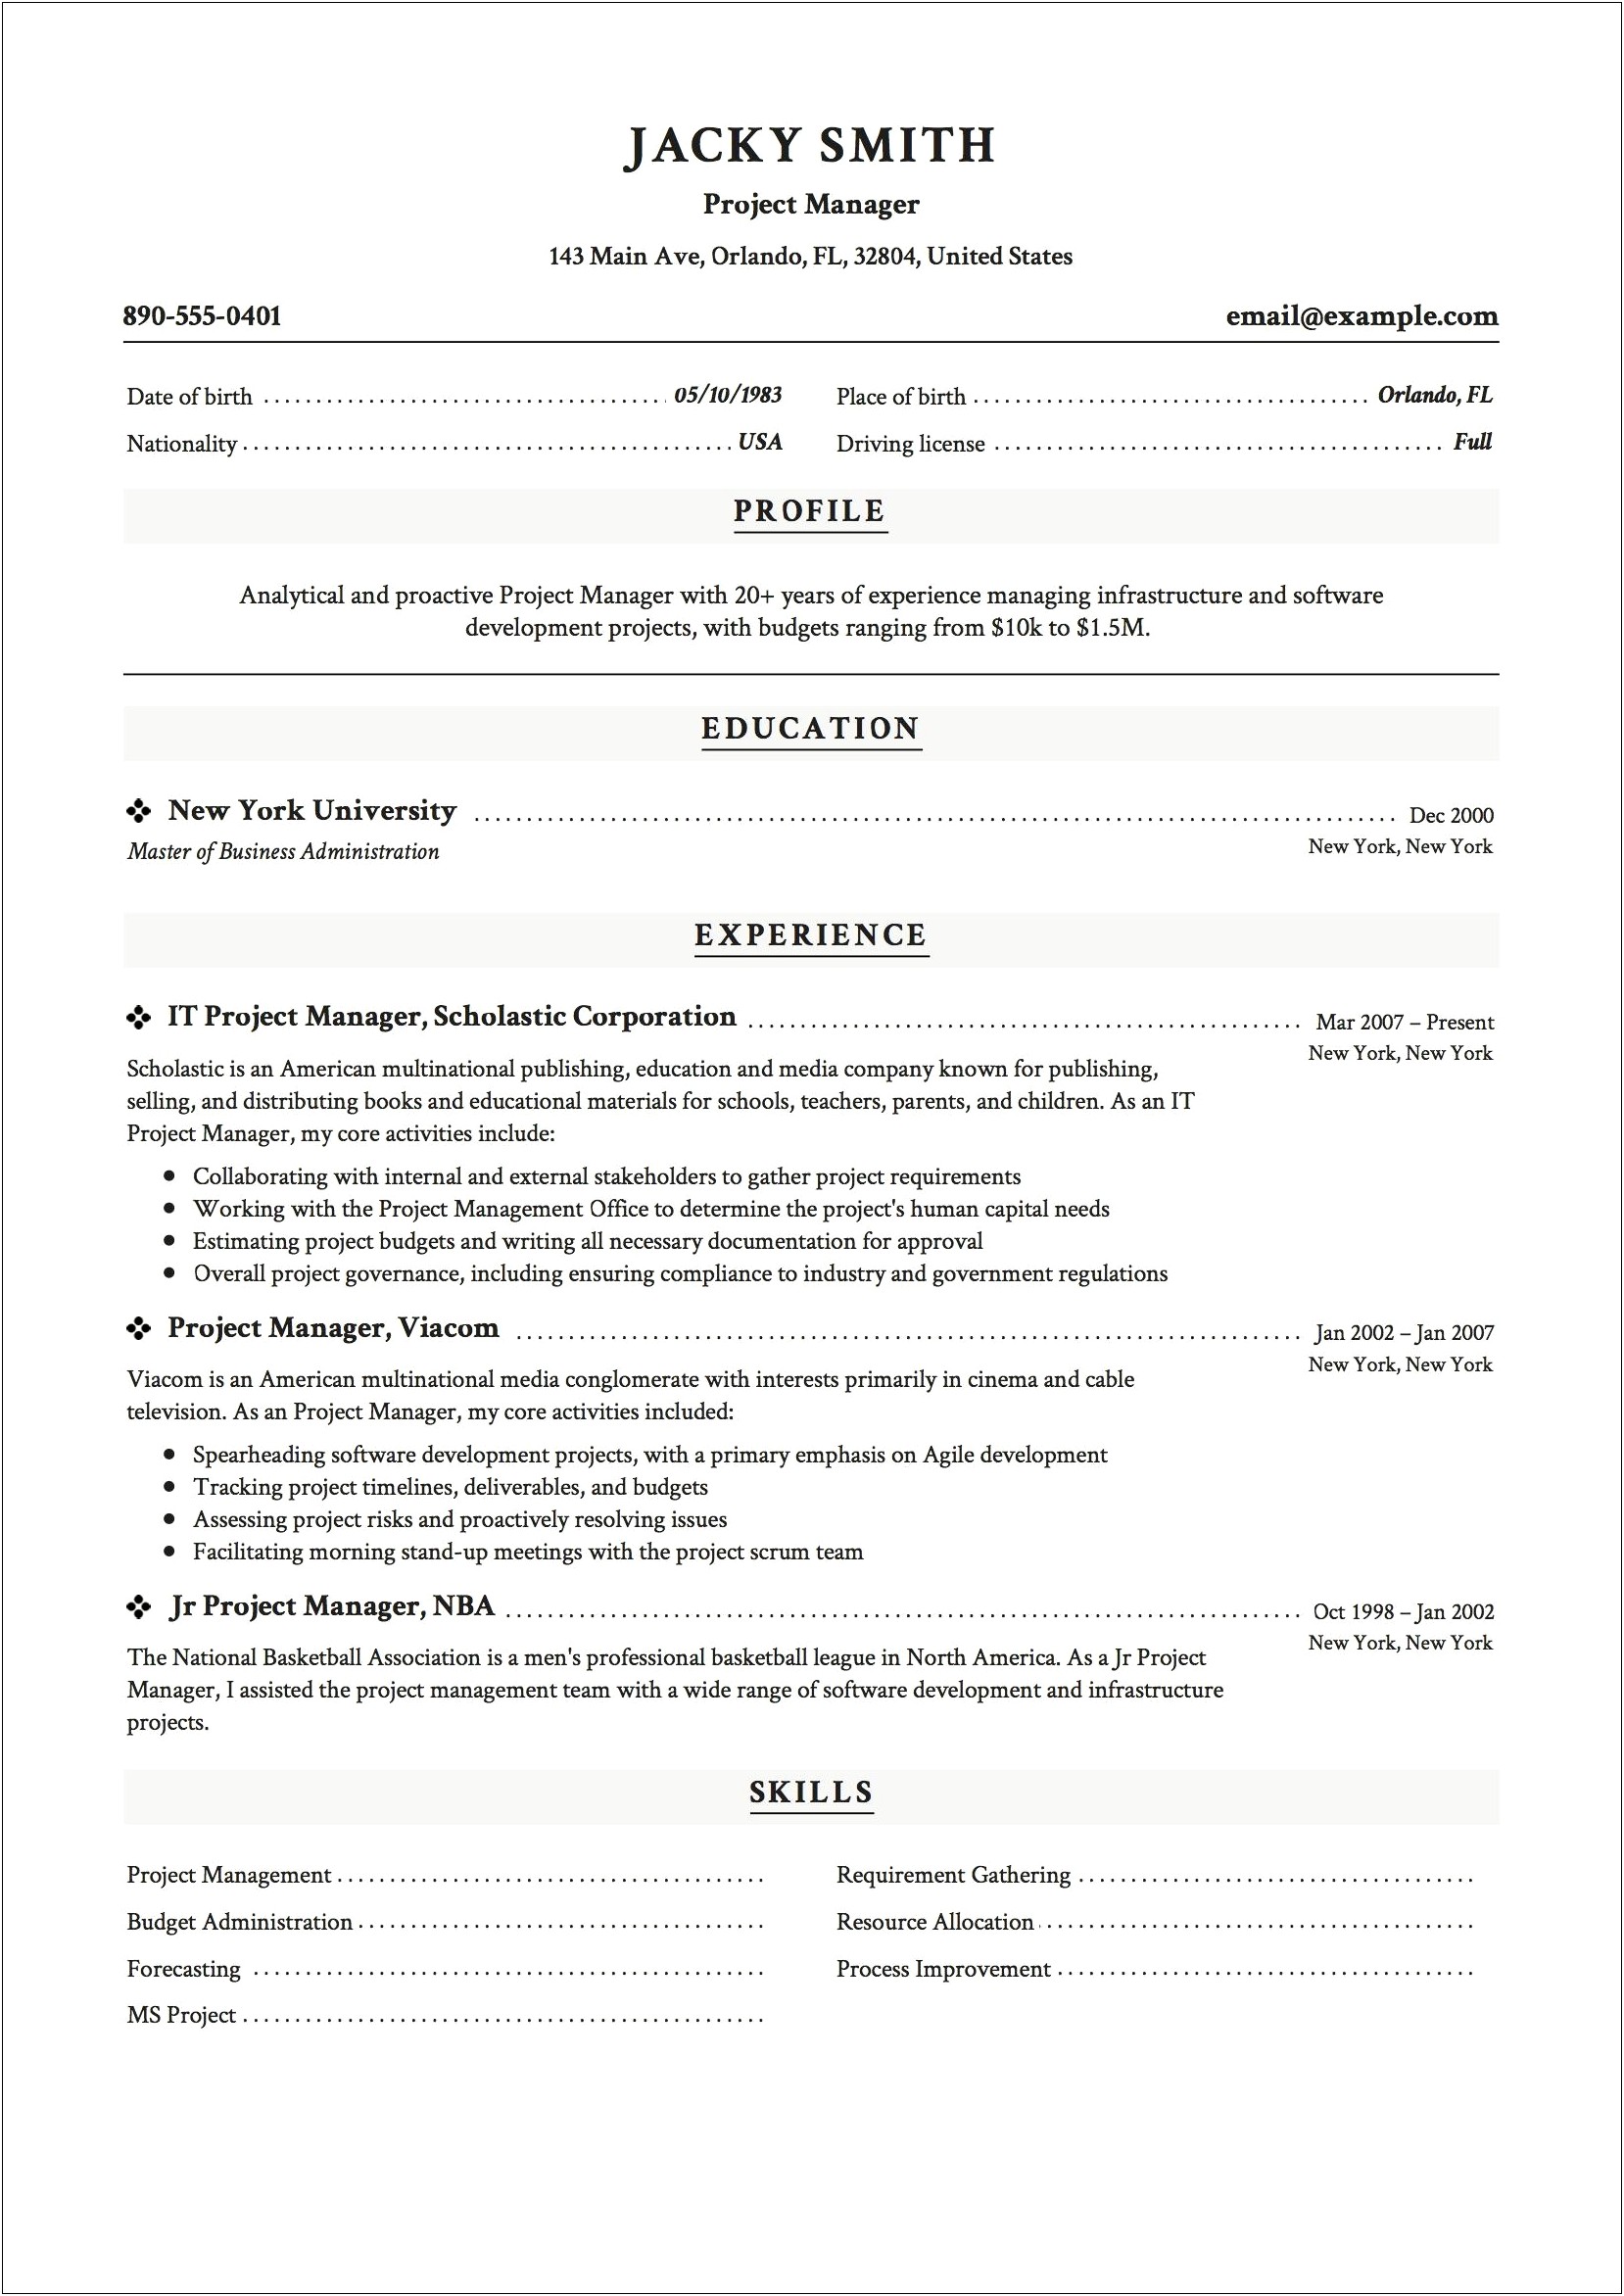 Good Objective Statements For Construction Resume